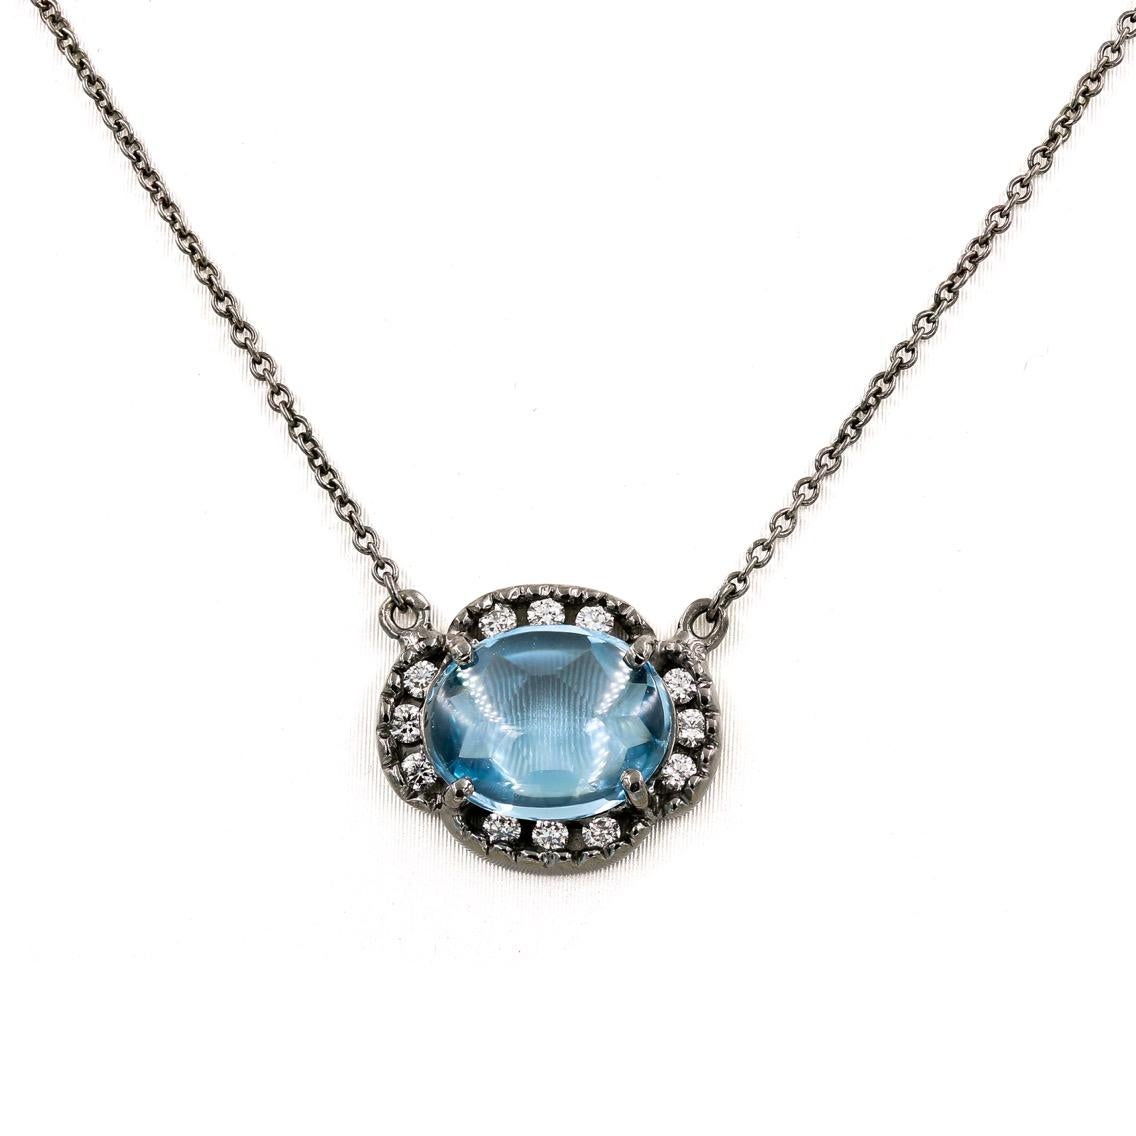 This elegant Lester Lampert original pendant in 18kt. white gold contains an oval cut cabochon blue topaz center= 2.60cts. that is surrounded by 12 ideal cut round diamonds approximately=.25ct. t.w. The round diamonds are G in color and VS in